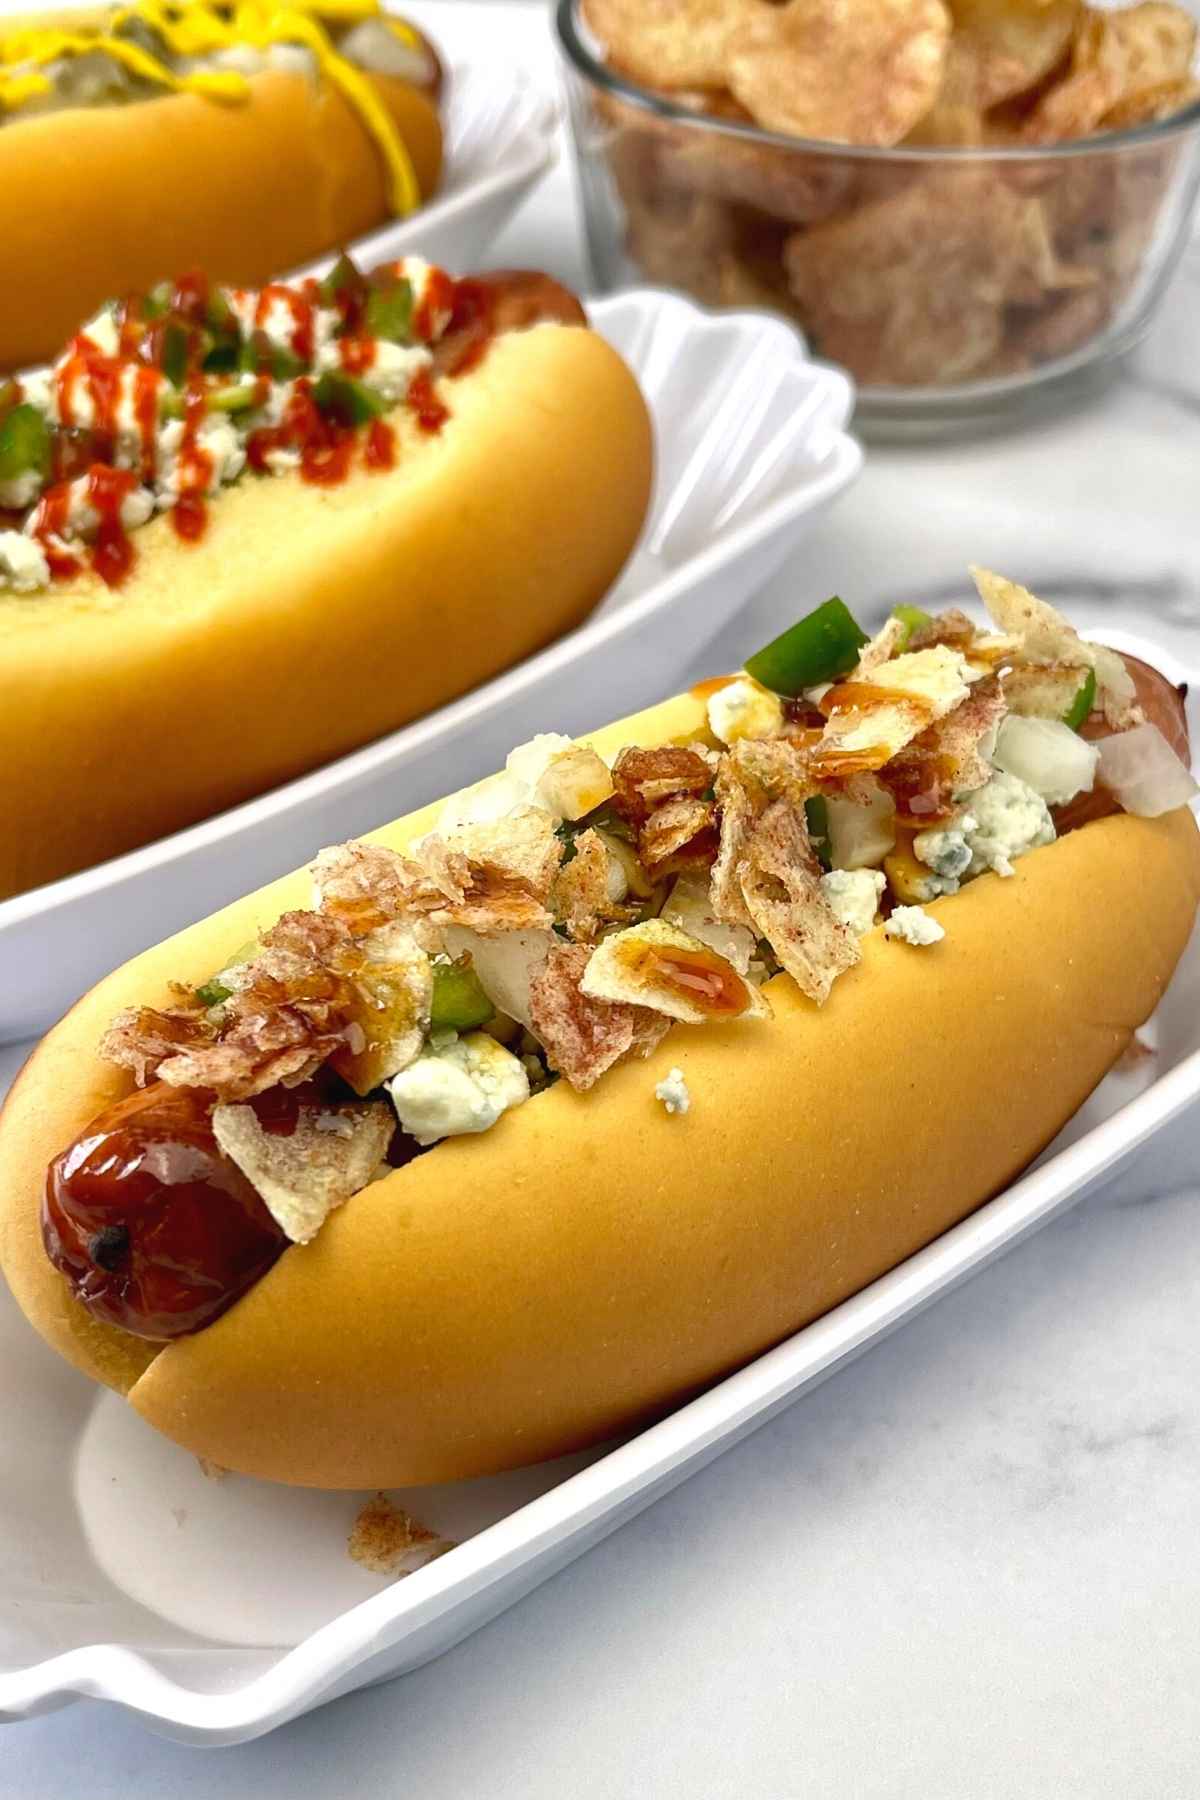 Hot Dog in a roll with a combination of toppings.